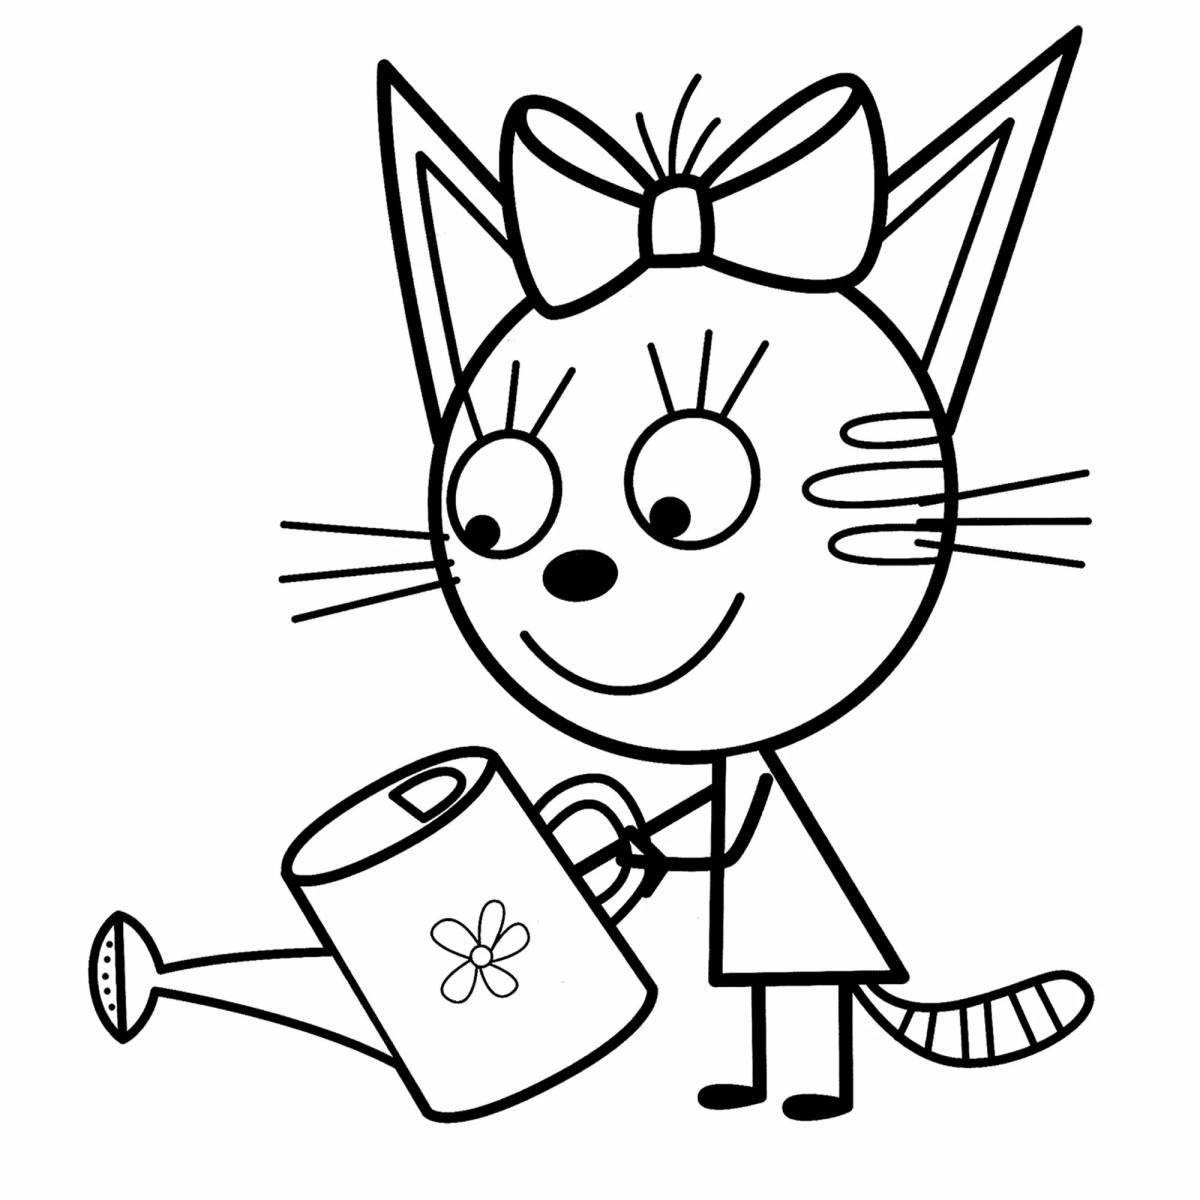 Fun coloring 3 cats for kids